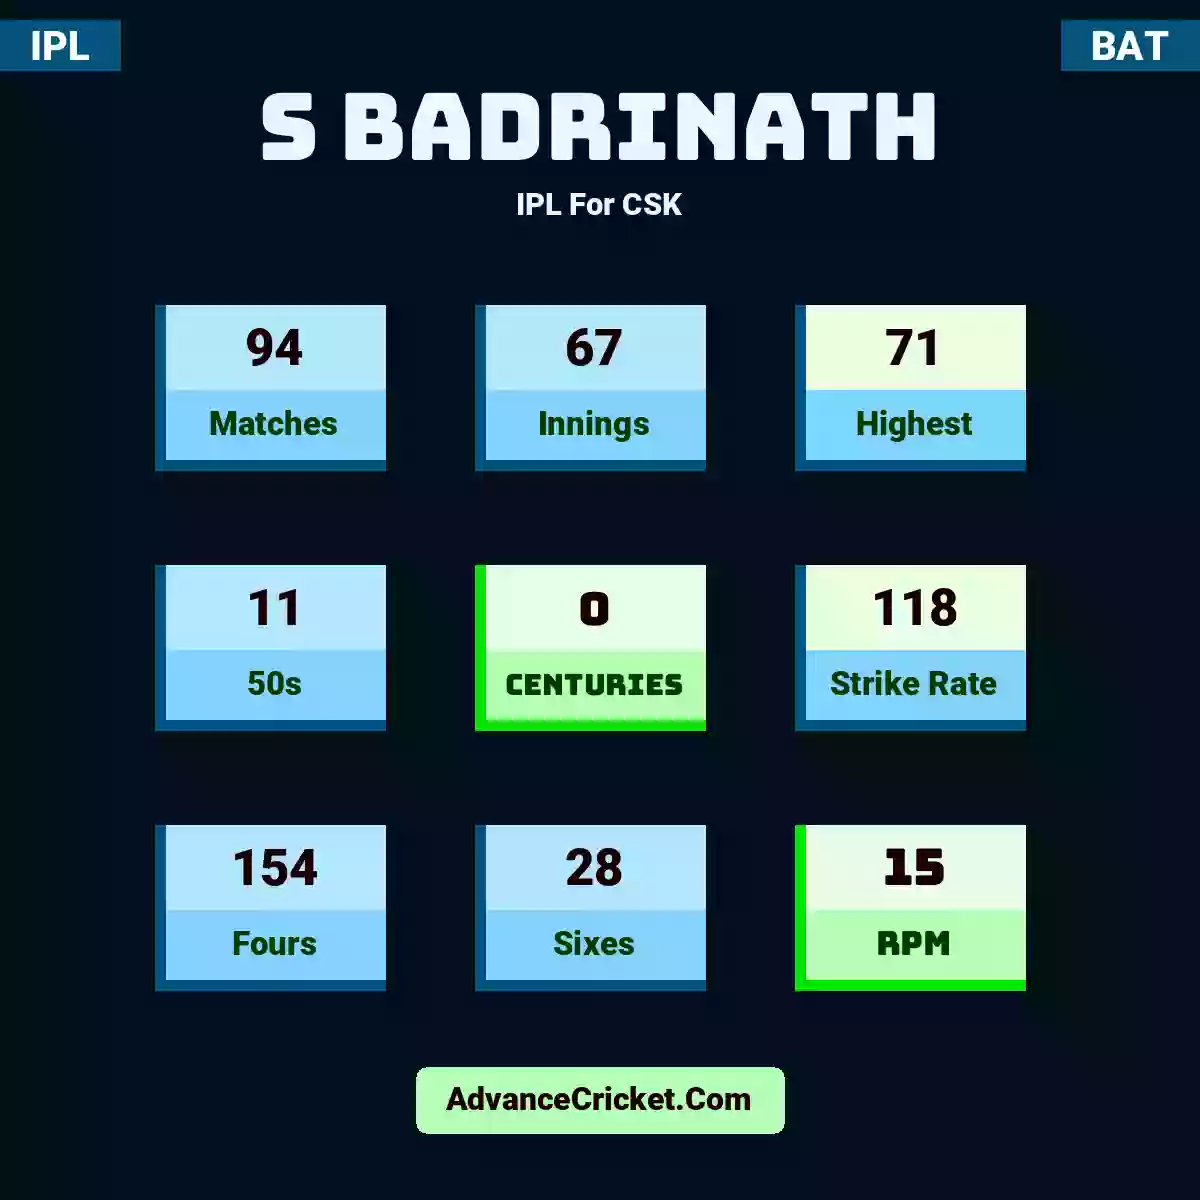 S Badrinath IPL  For CSK, S Badrinath played 94 matches, scored 71 runs as highest, 11 half-centuries, and 0 centuries, with a strike rate of 118. S.Badrinath hit 154 fours and 28 sixes, with an RPM of 15.